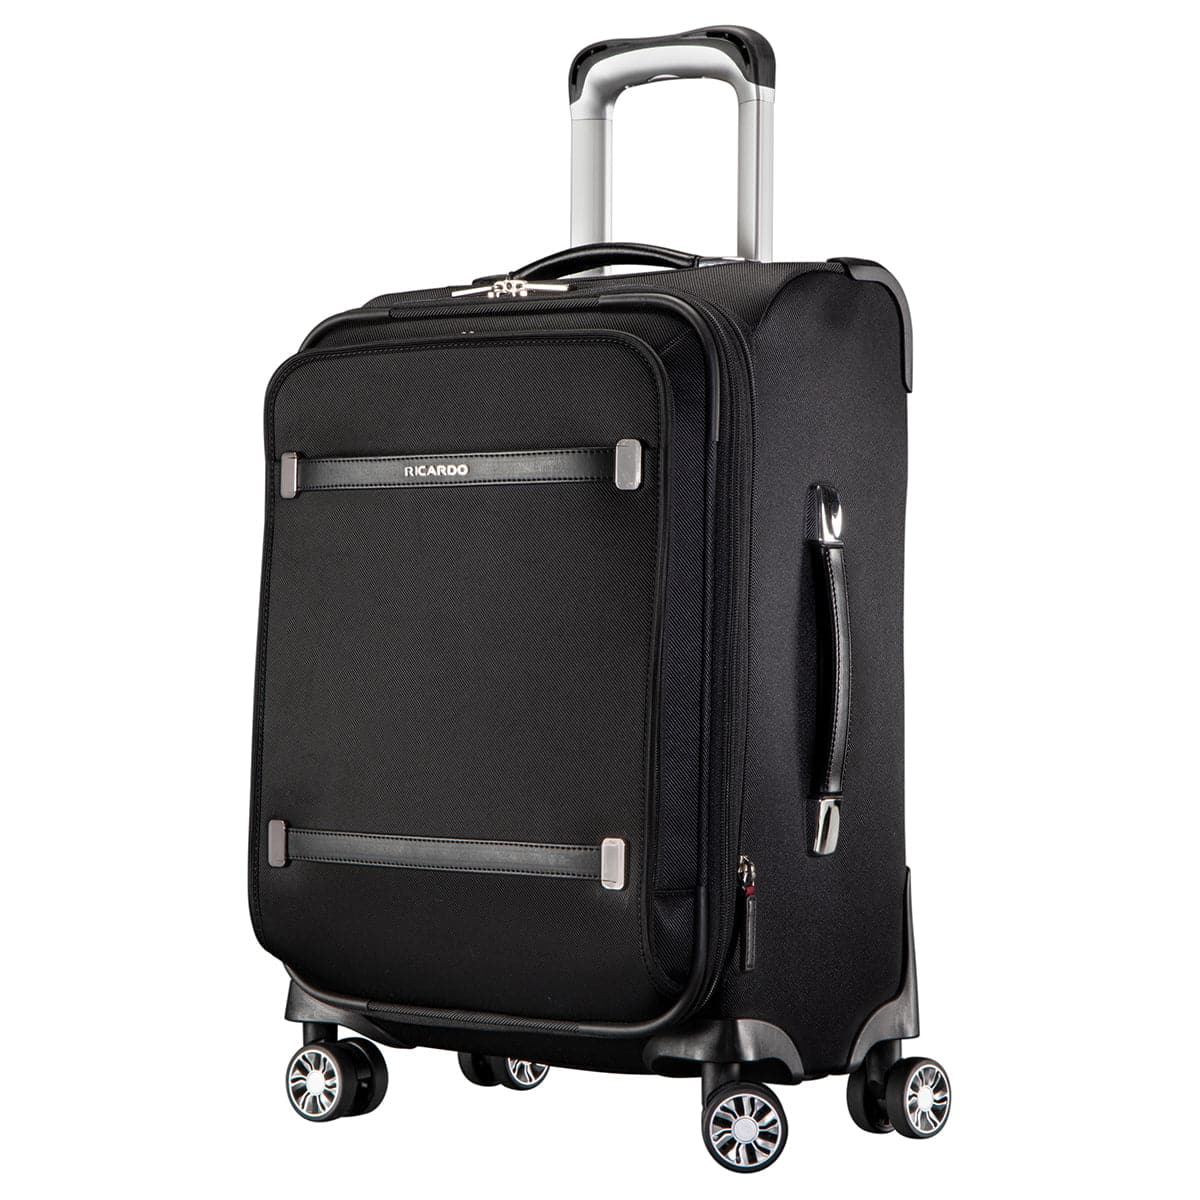 Ricardo Beverly Hills Rodeo Drive 2.0 Soft Side Carry-On Luggage